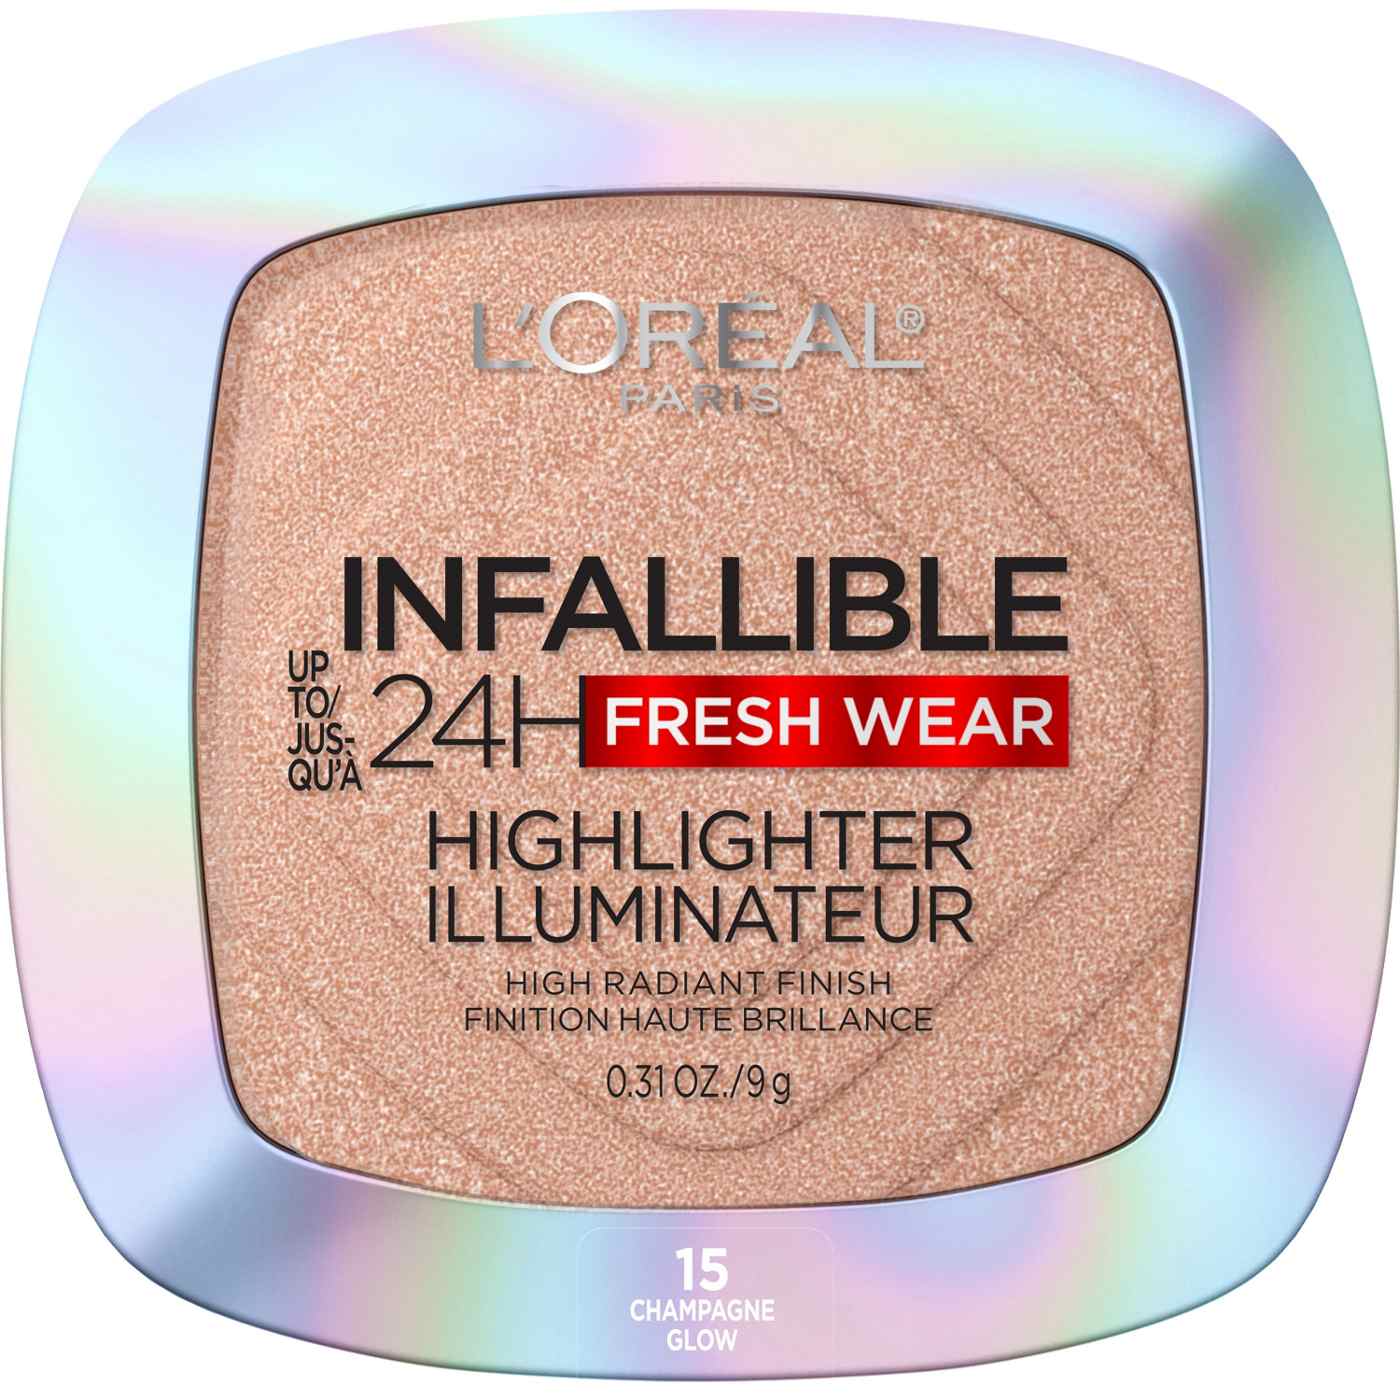 L'Oréal Paris Infallible 24H Fresh Wear Highlighter - Champagne Glow; image 1 of 2